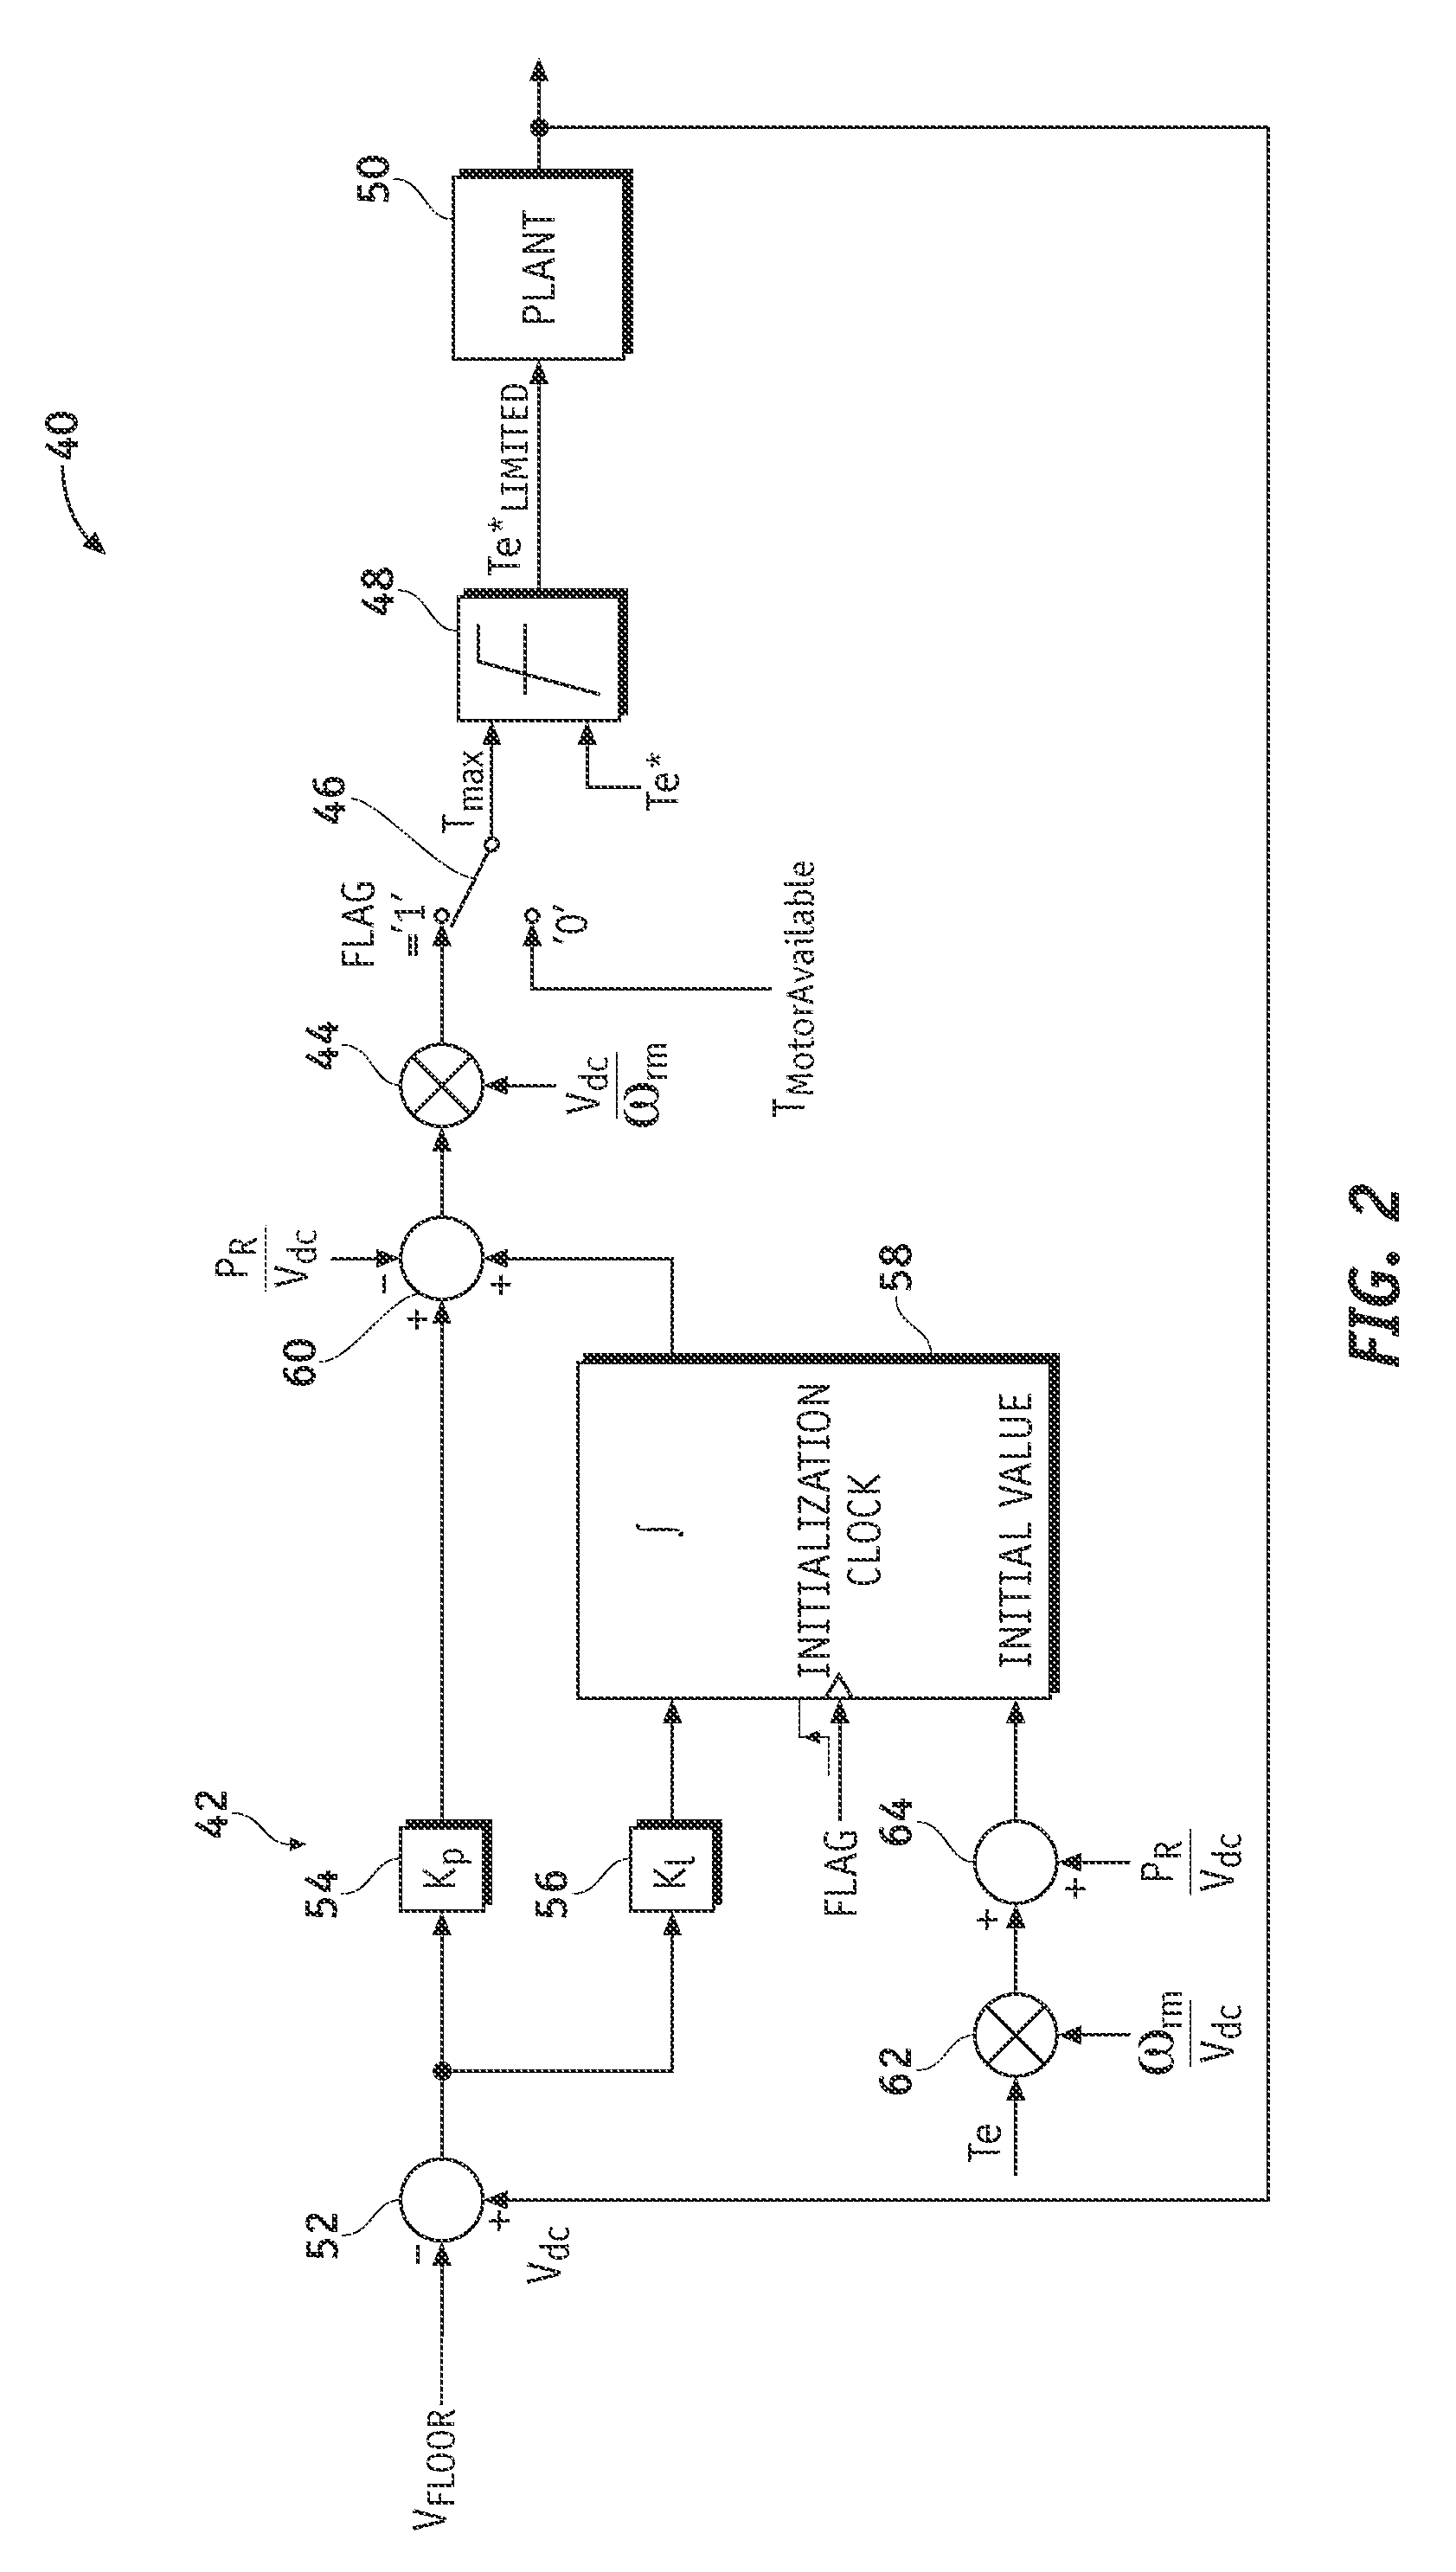 System and method for controlling electric drive systems